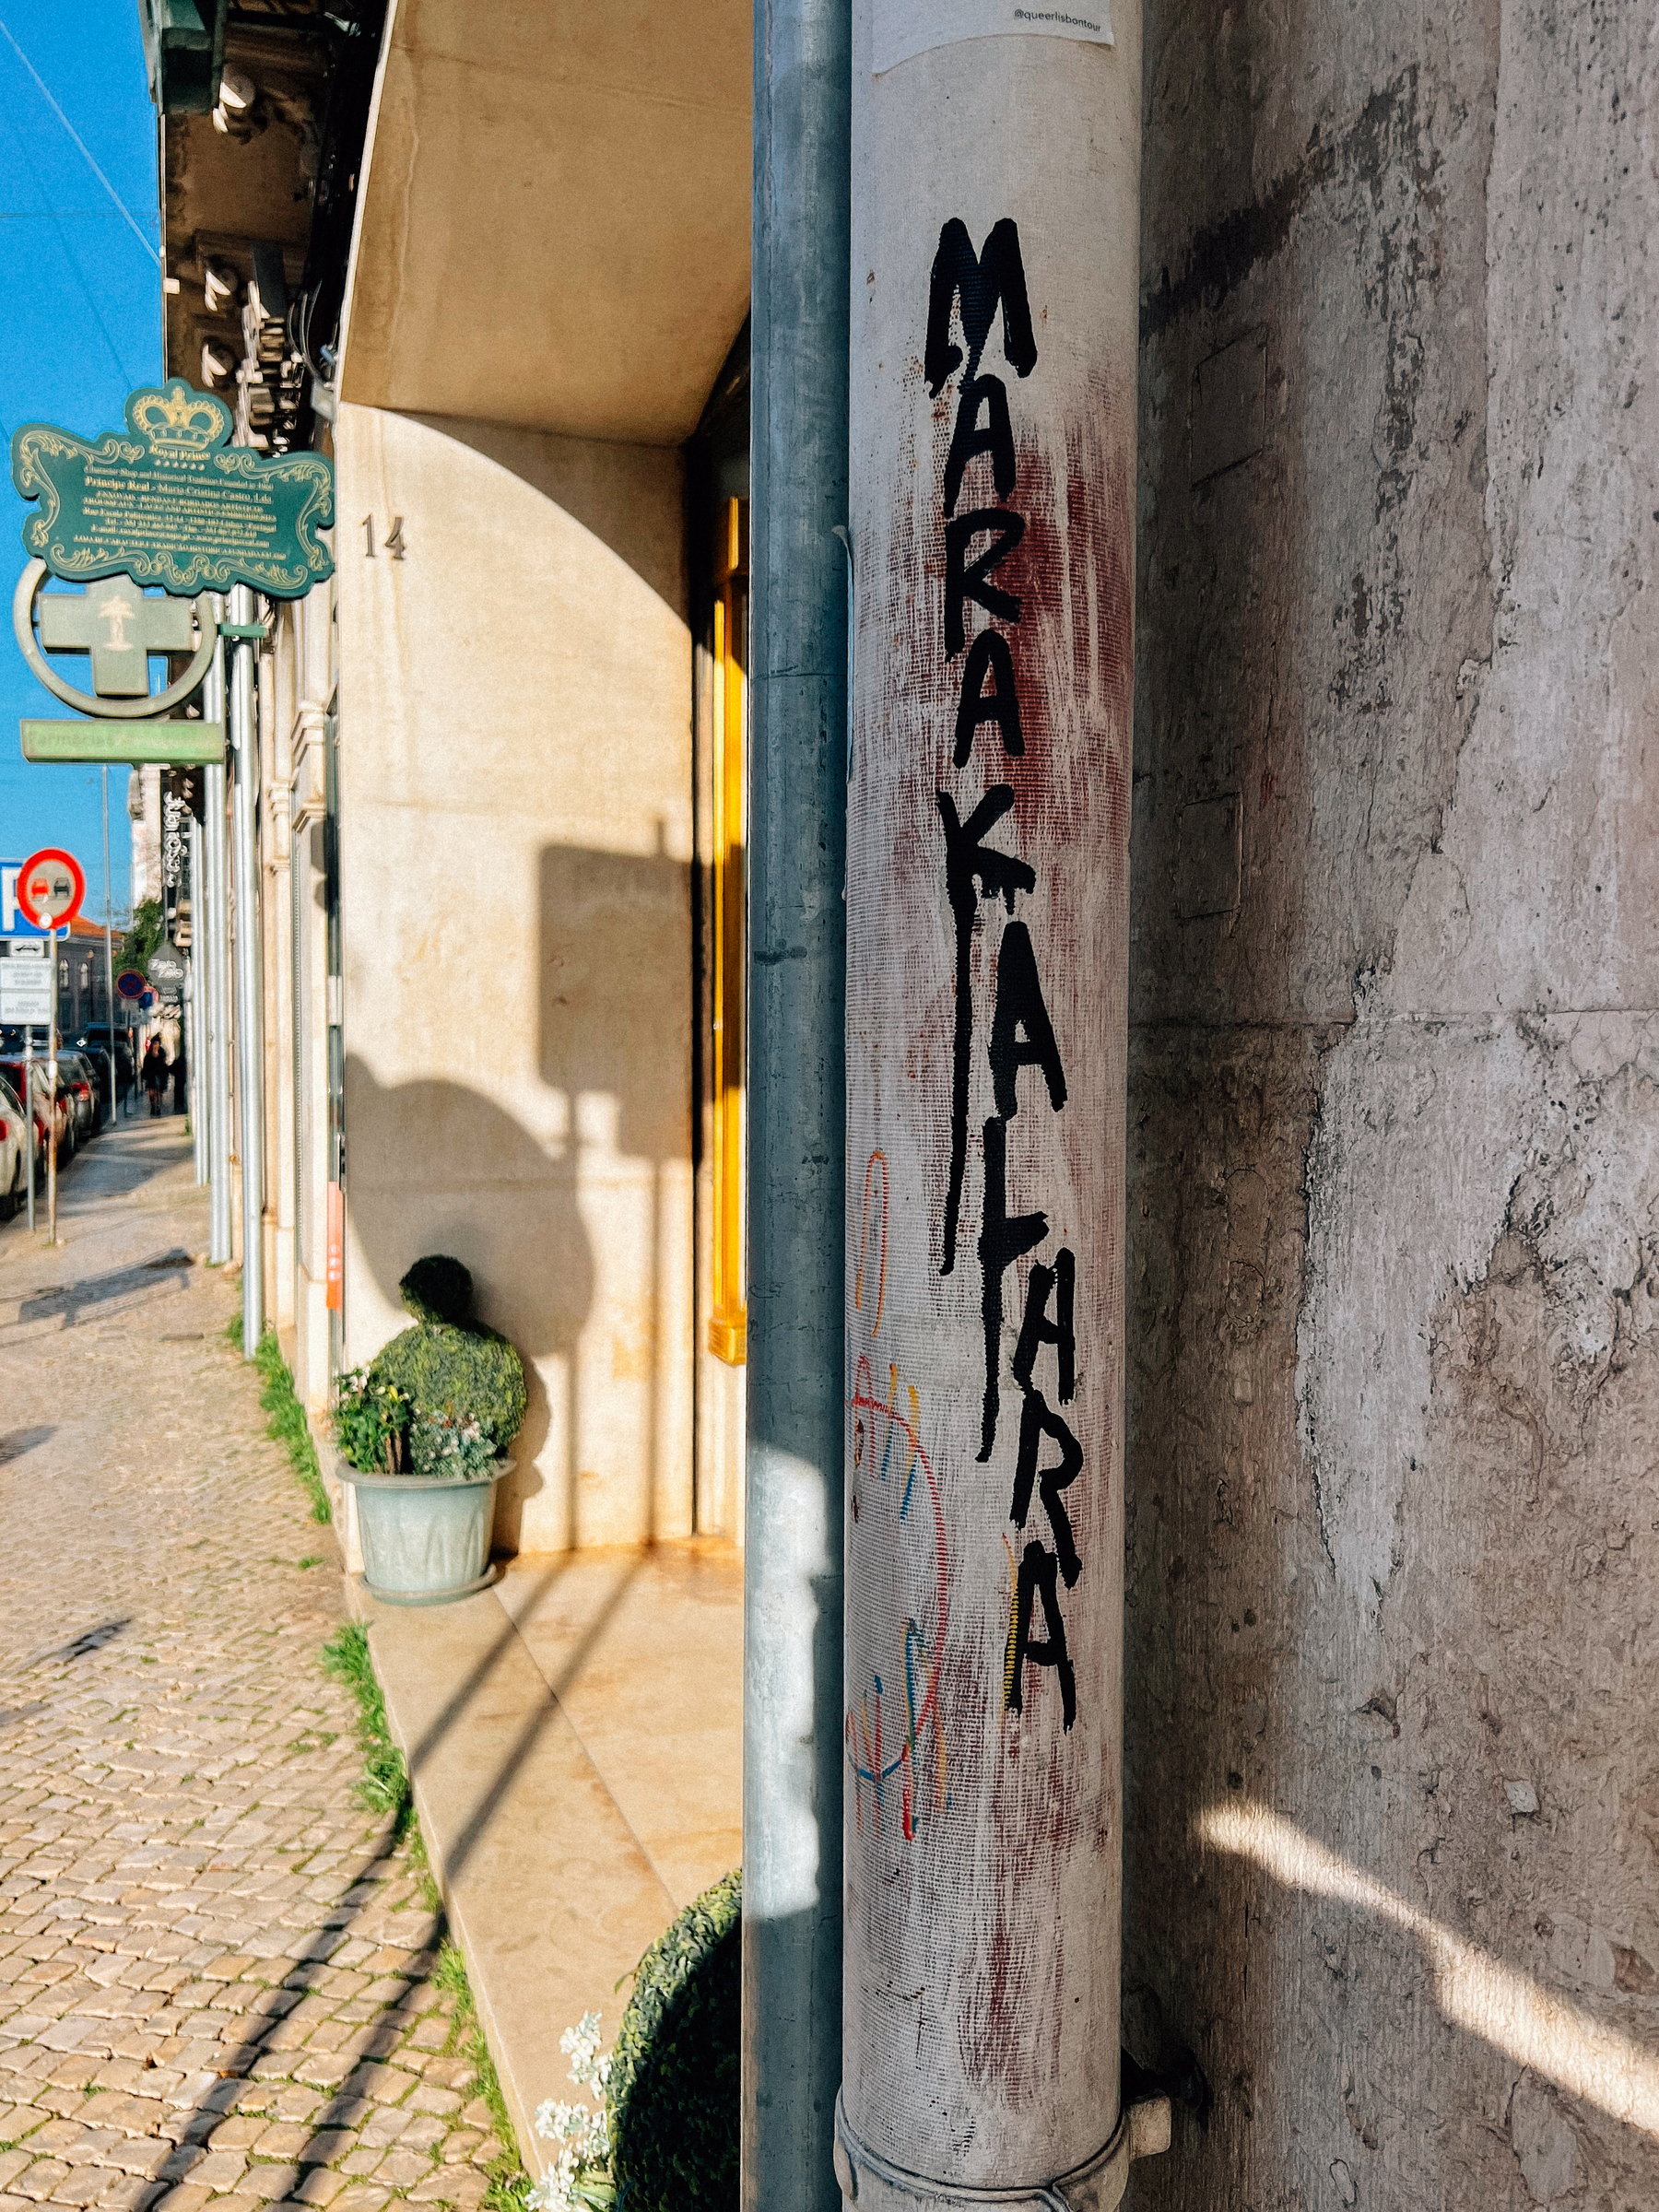 Graffiti on a column with the word &ldquo;MARAKALARA.&rdquo; Nearby is a street sign and potted plants along a cobblestone sidewalk, with a view down a quiet street.